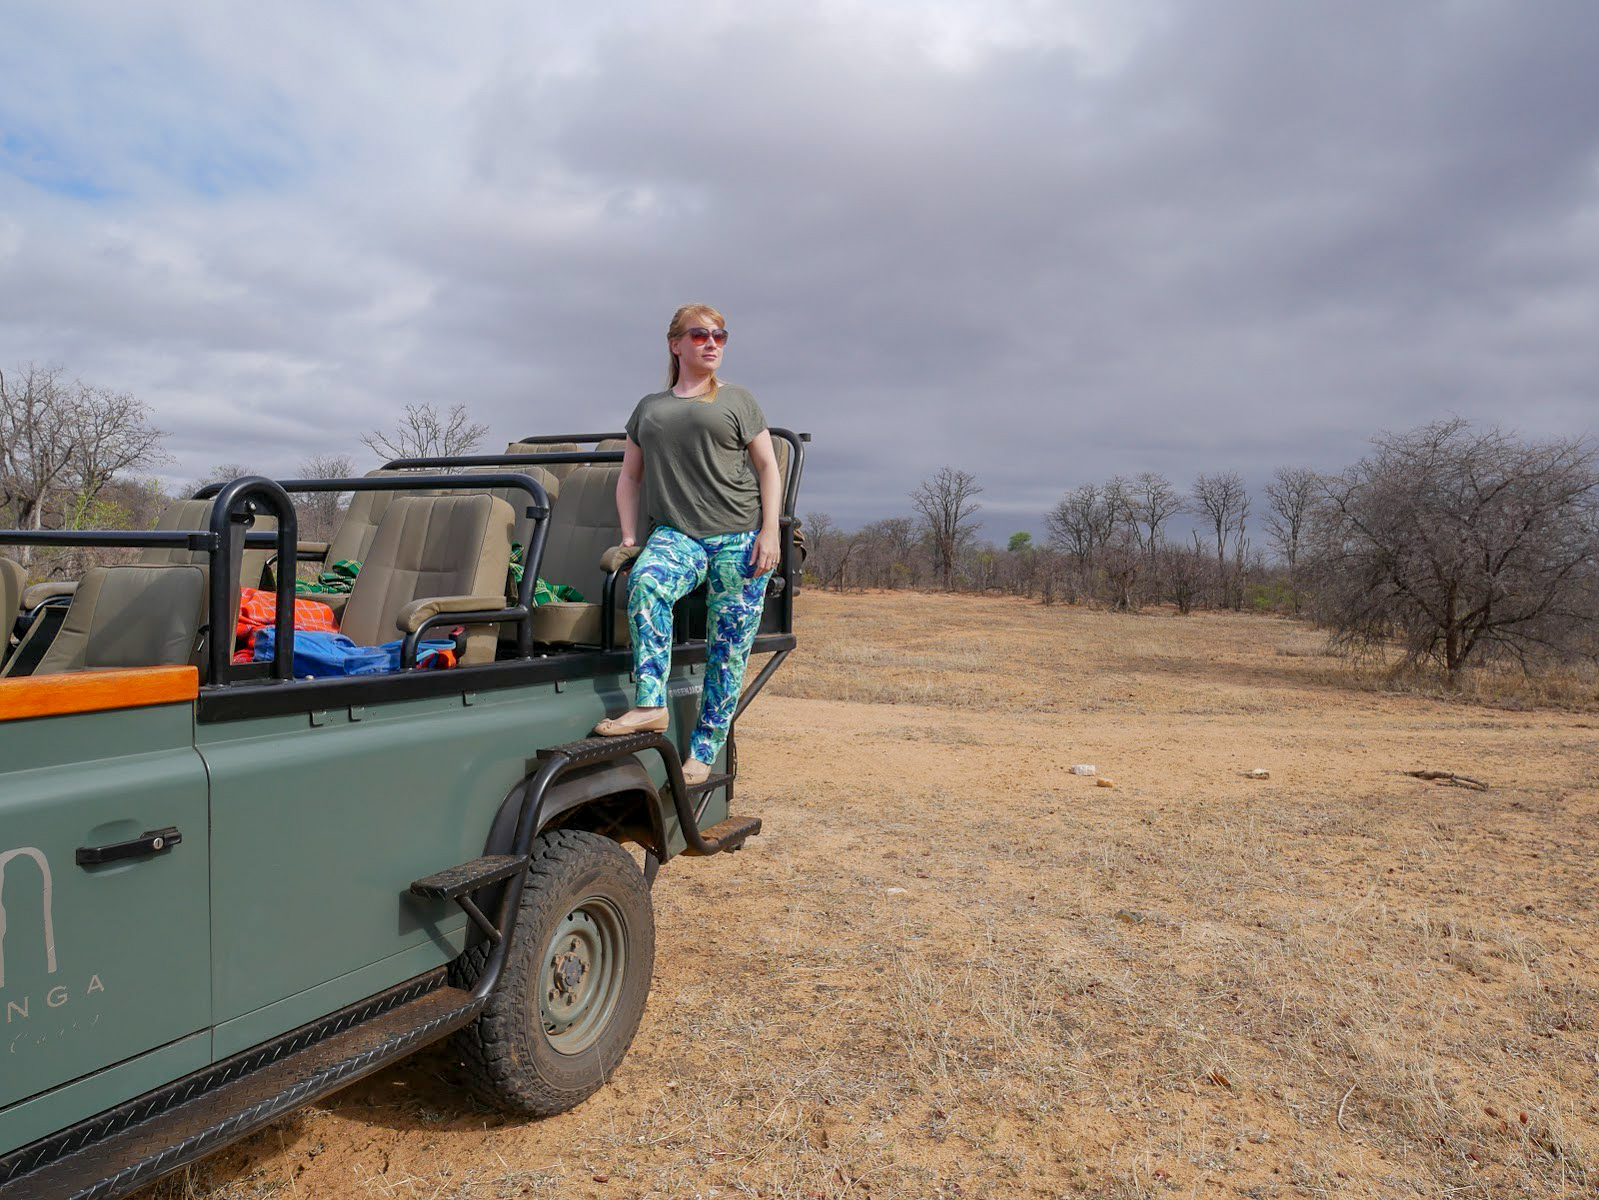 What to Pack for a Safari in South Africa